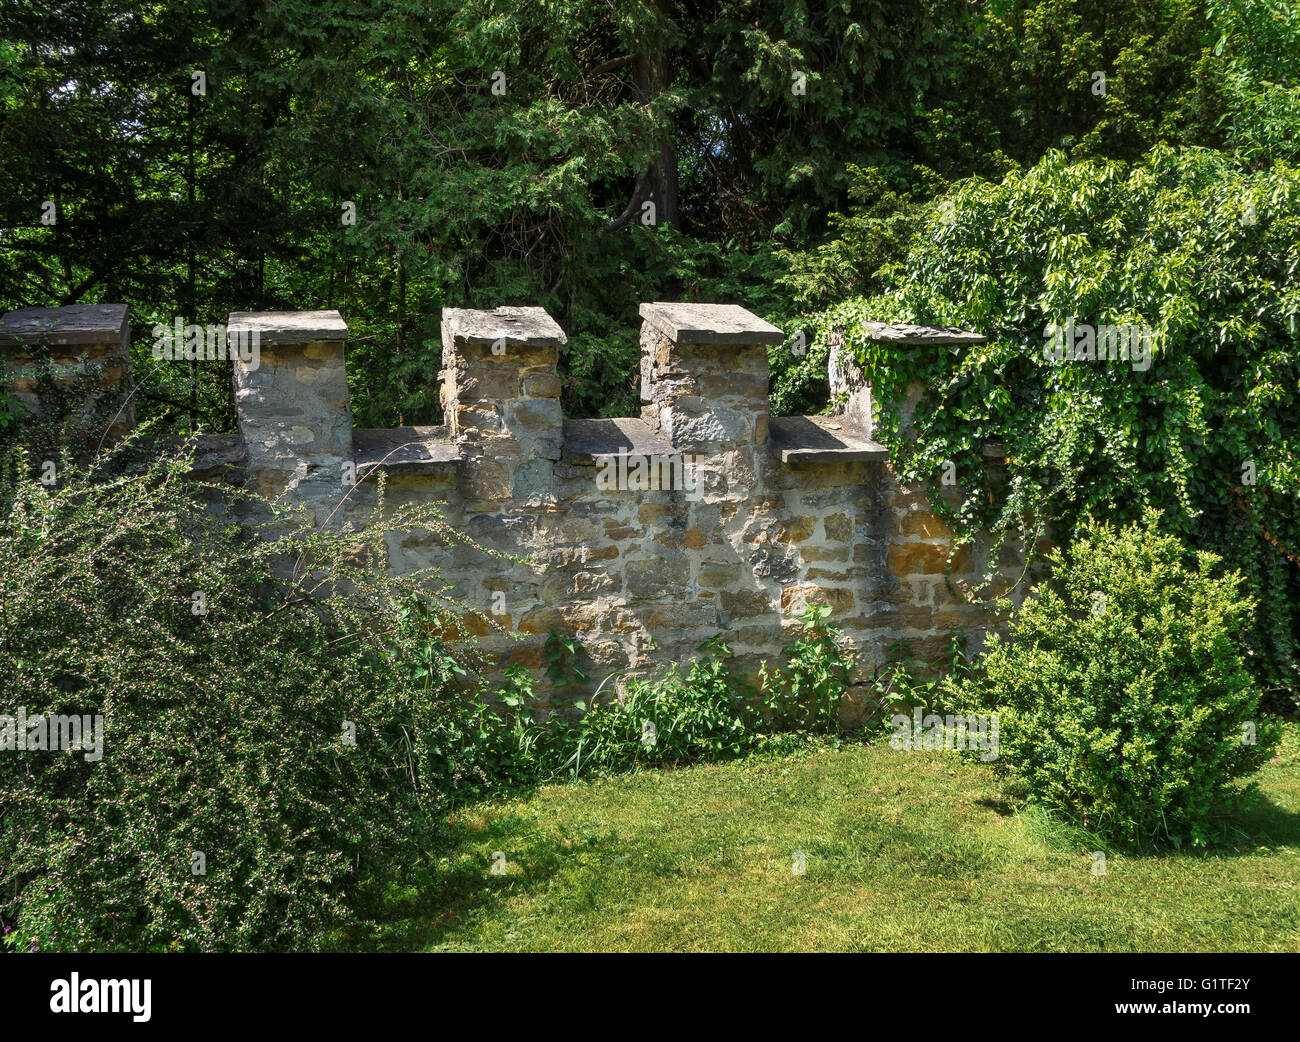 Castle wall with battlement in a garden Stock Photo